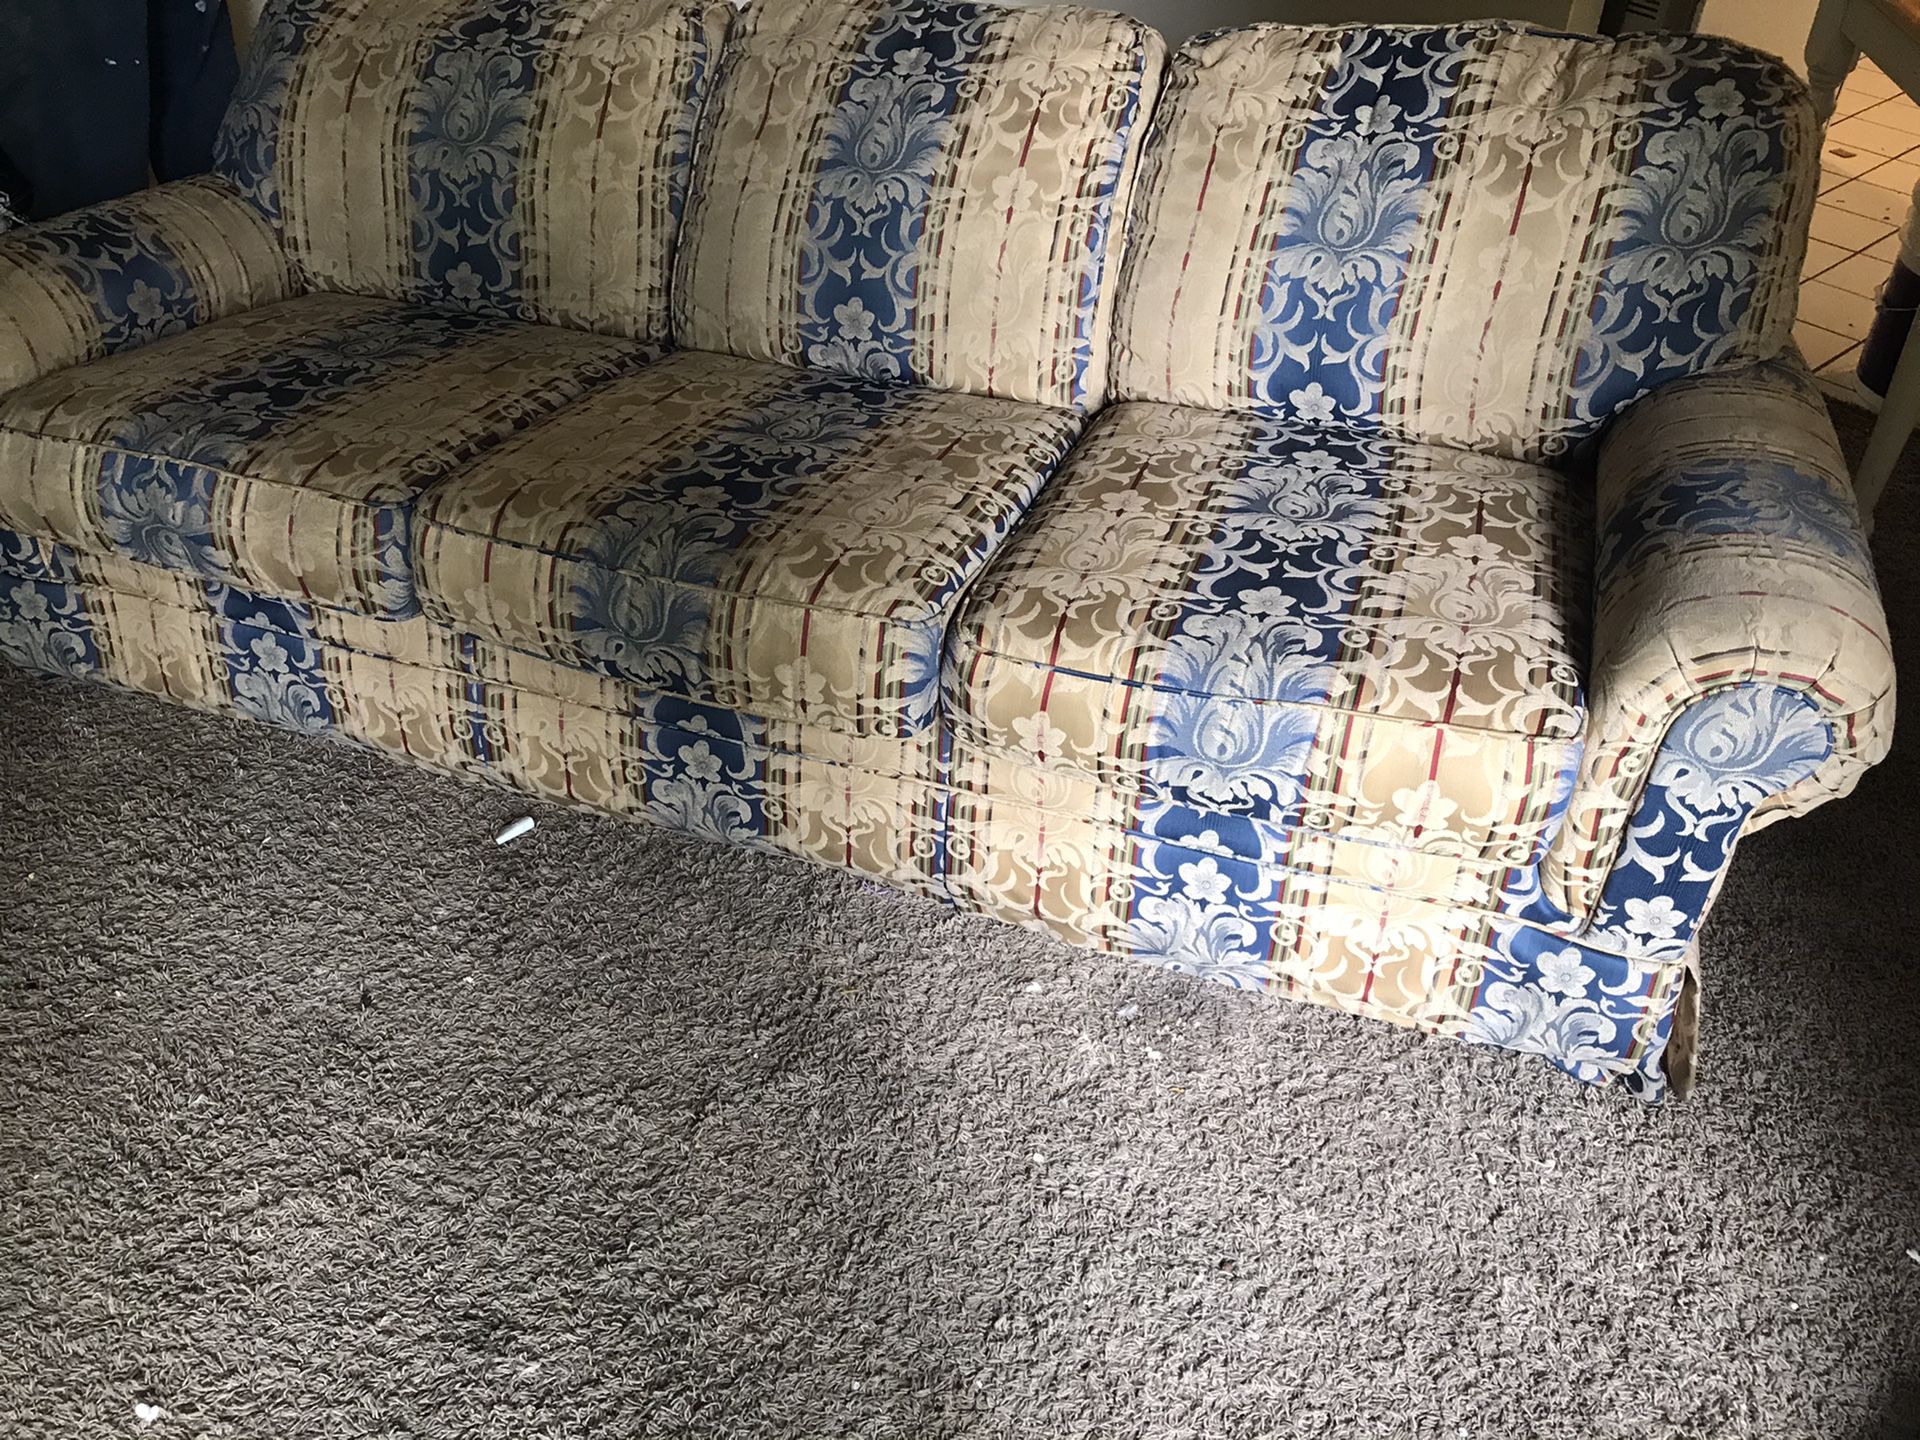 Used couch like new.